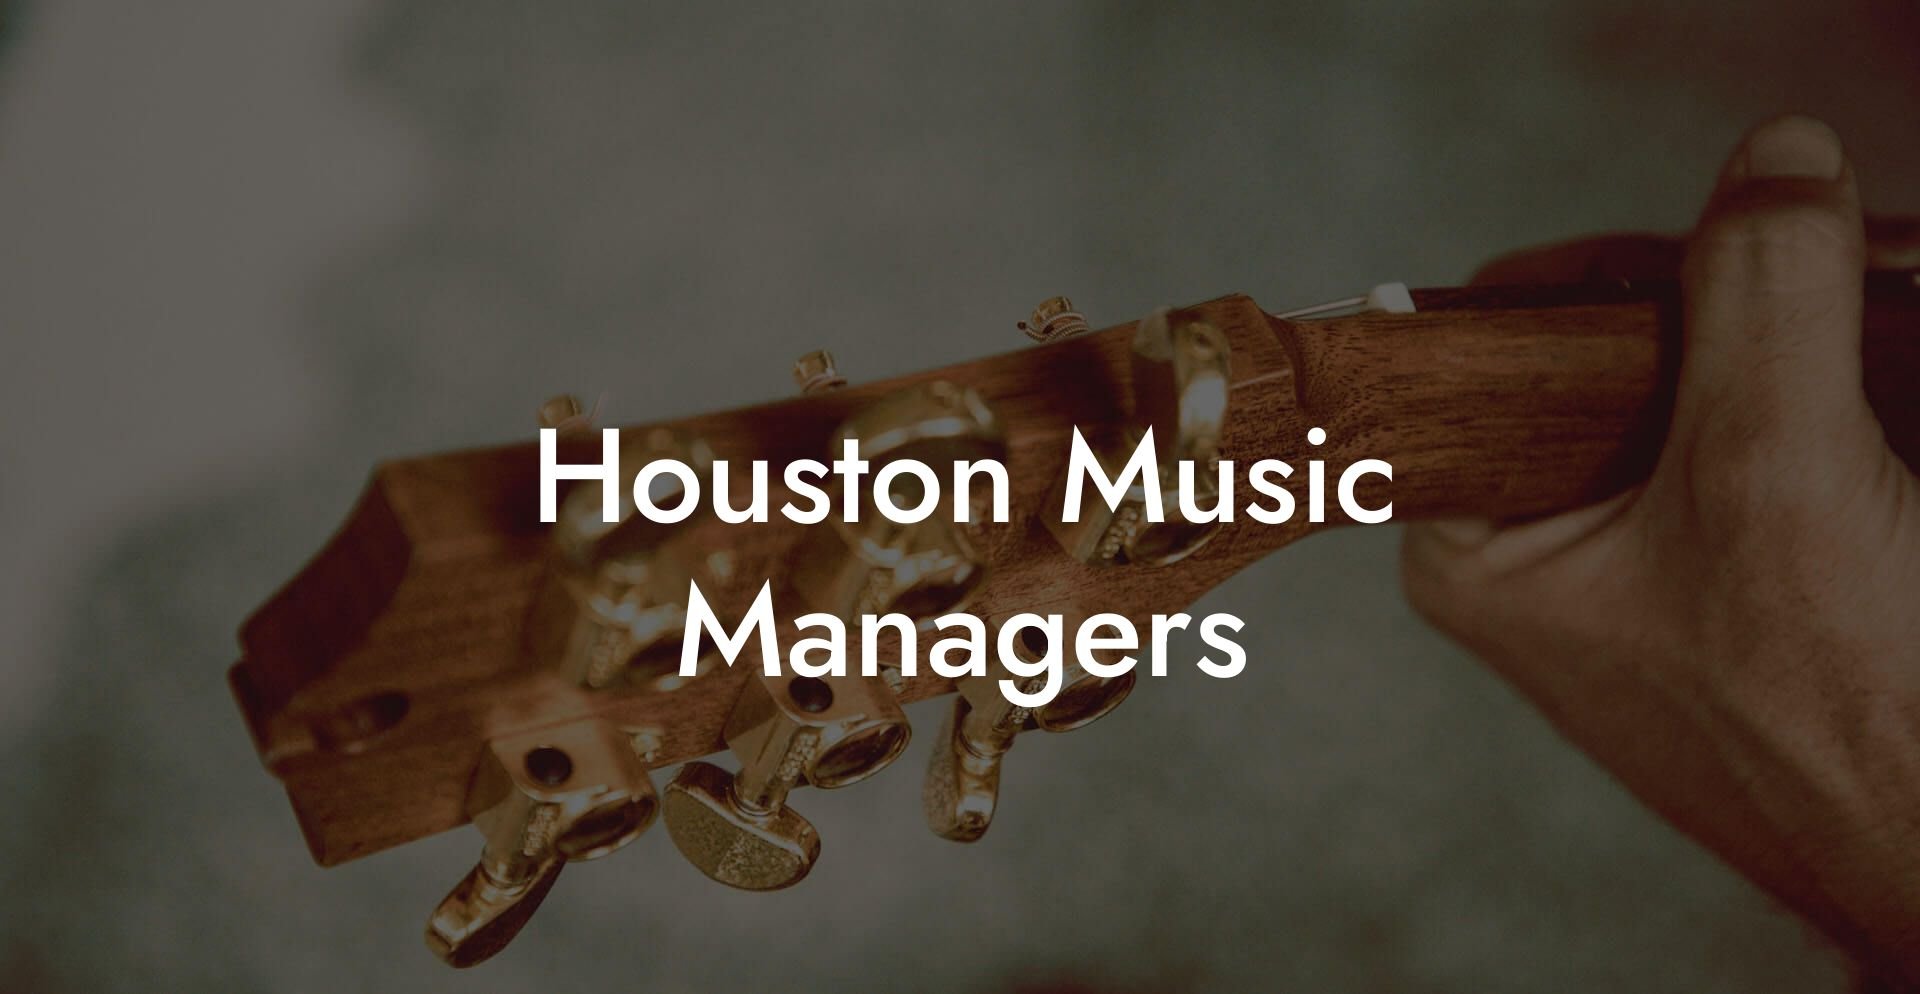 Houston Music Managers